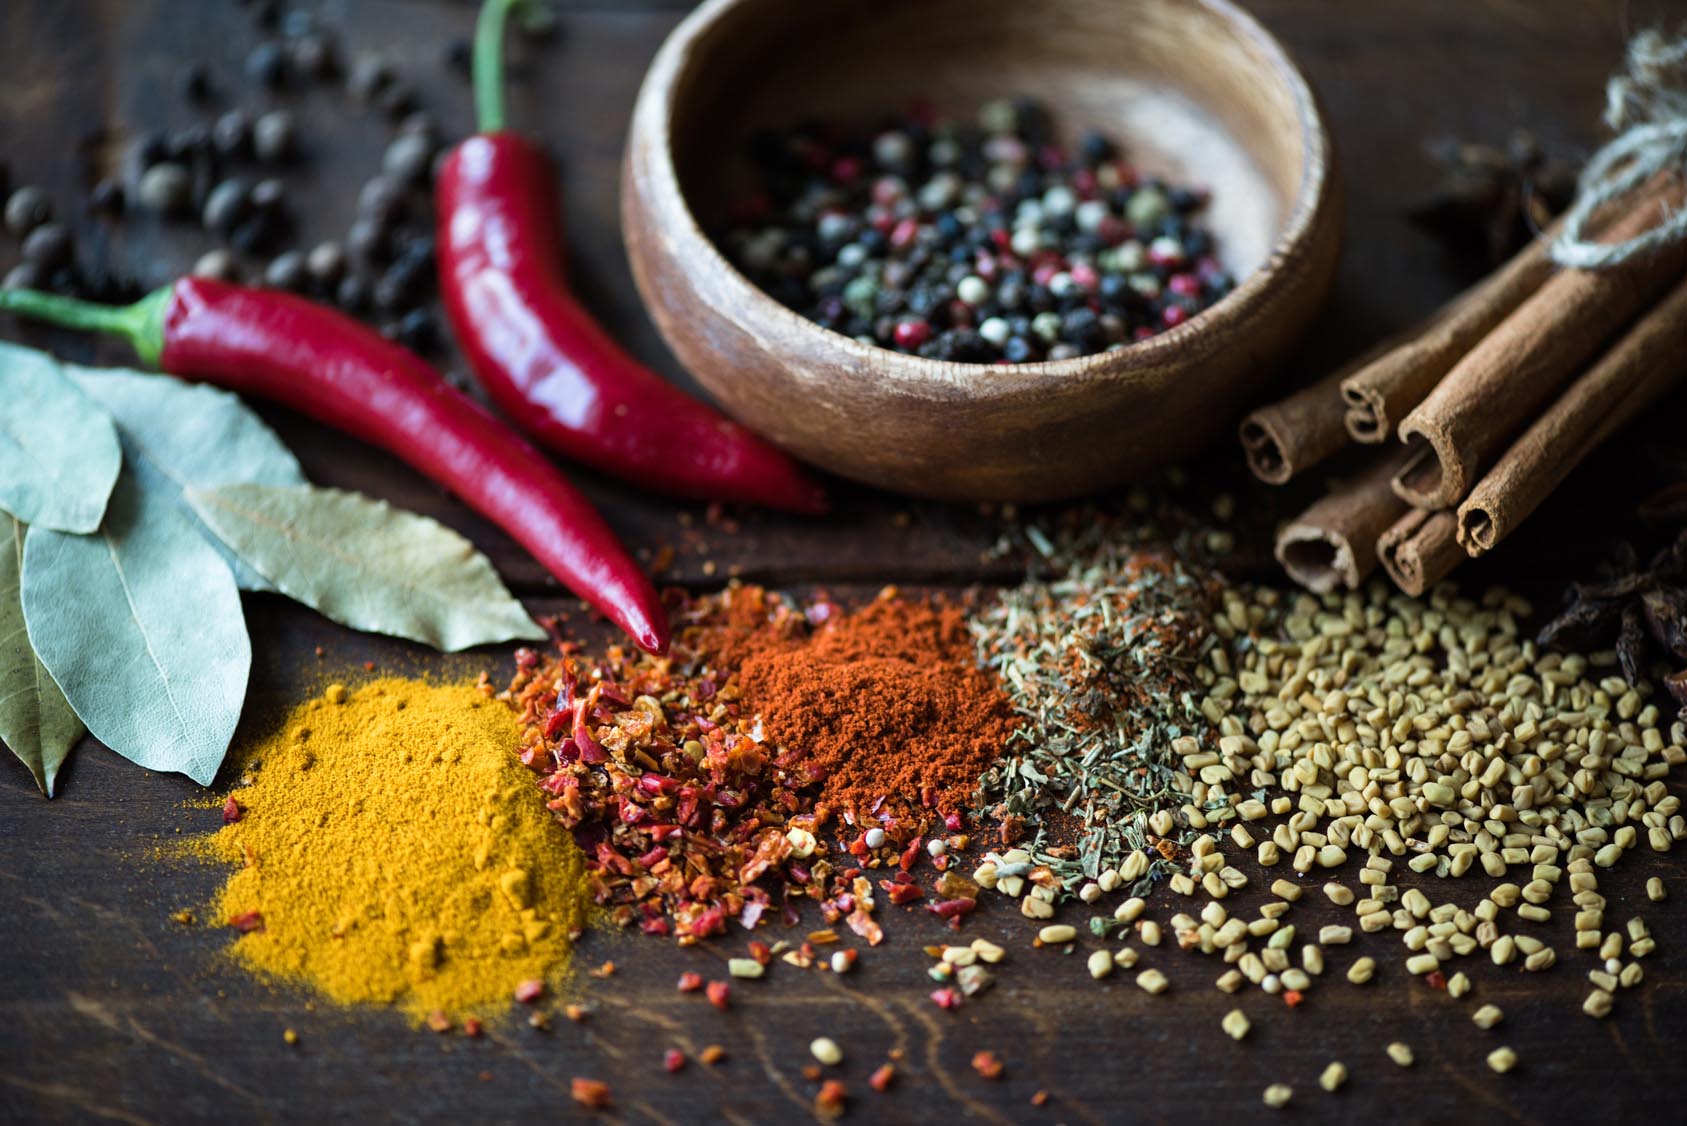 Scattered dried spices, peppercorn, cinnamon stick and dried leaves with bright red chili peppers. Gourmet Spice Company, Wholesale Food Distributor.